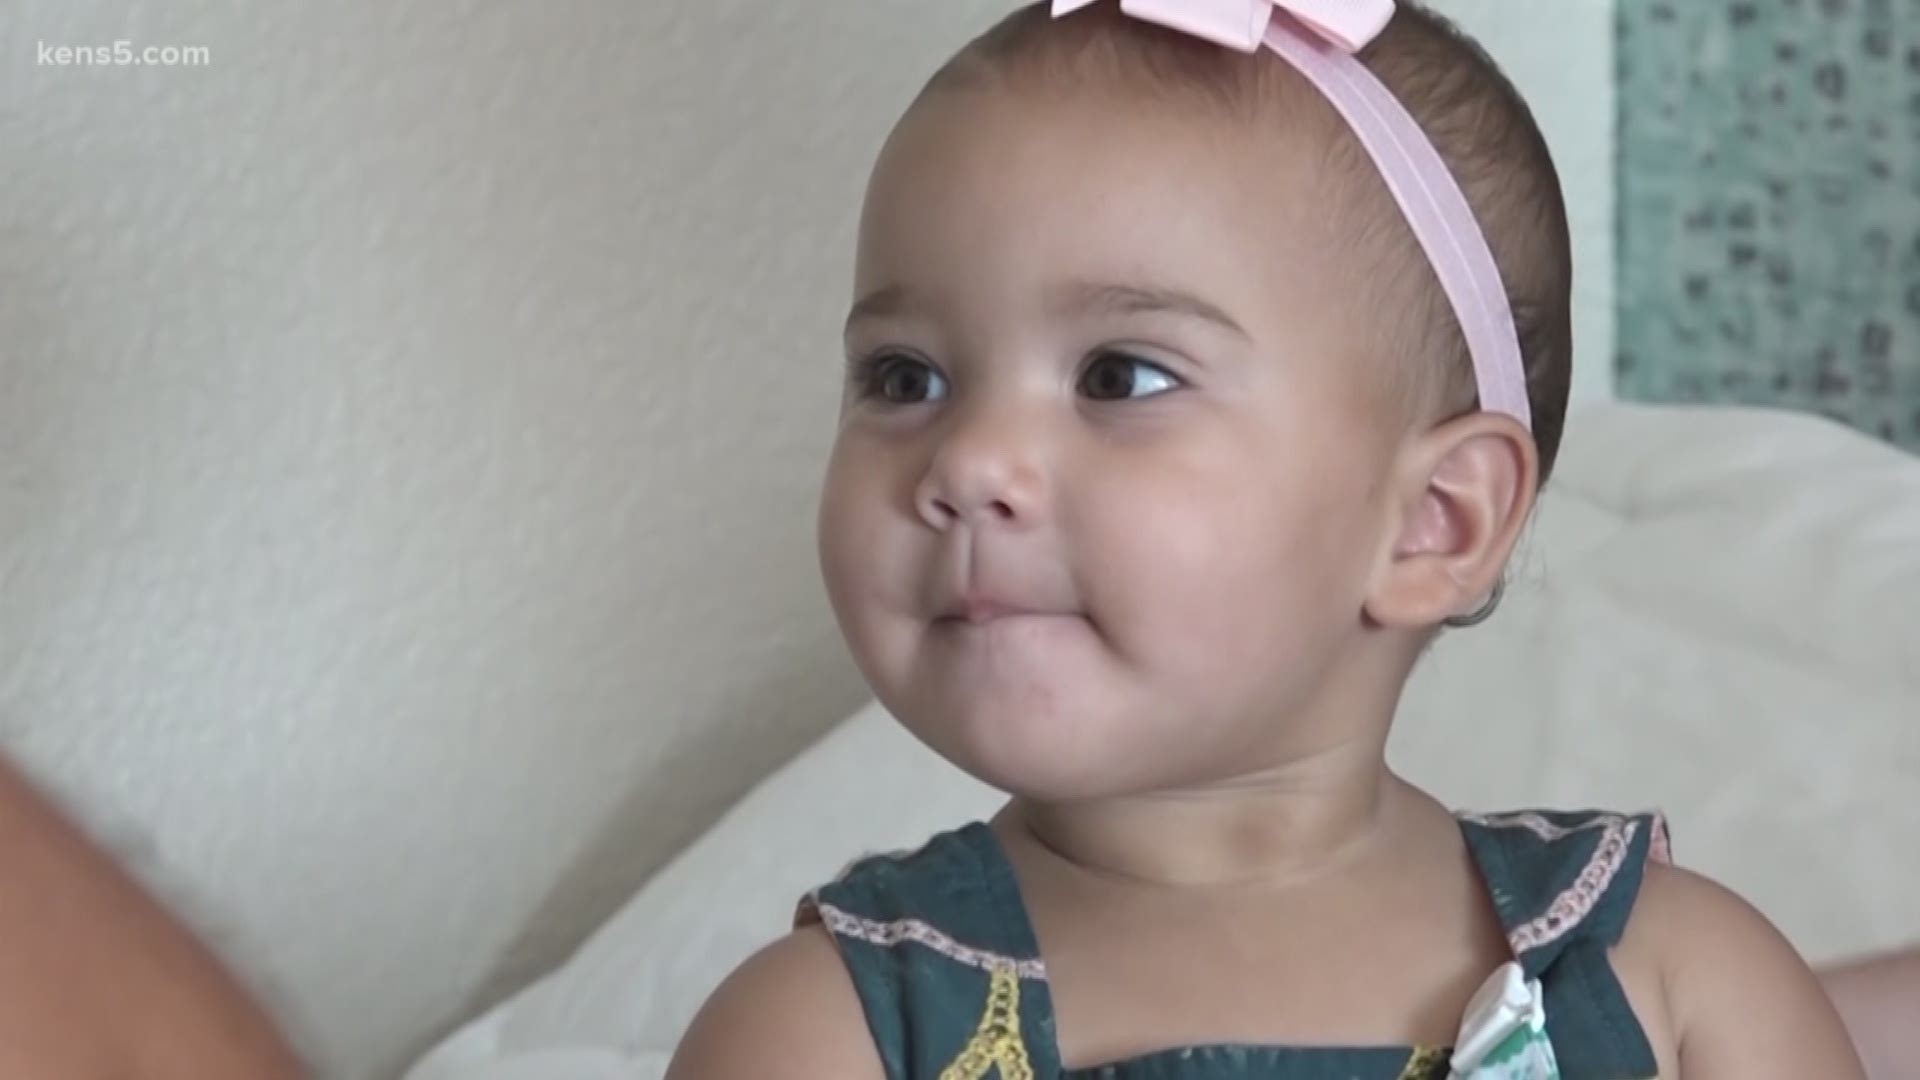 Her parents checked into a downtown San Antonio hotel, and checked out with a baby! Now that little girl is getting free stays for life.